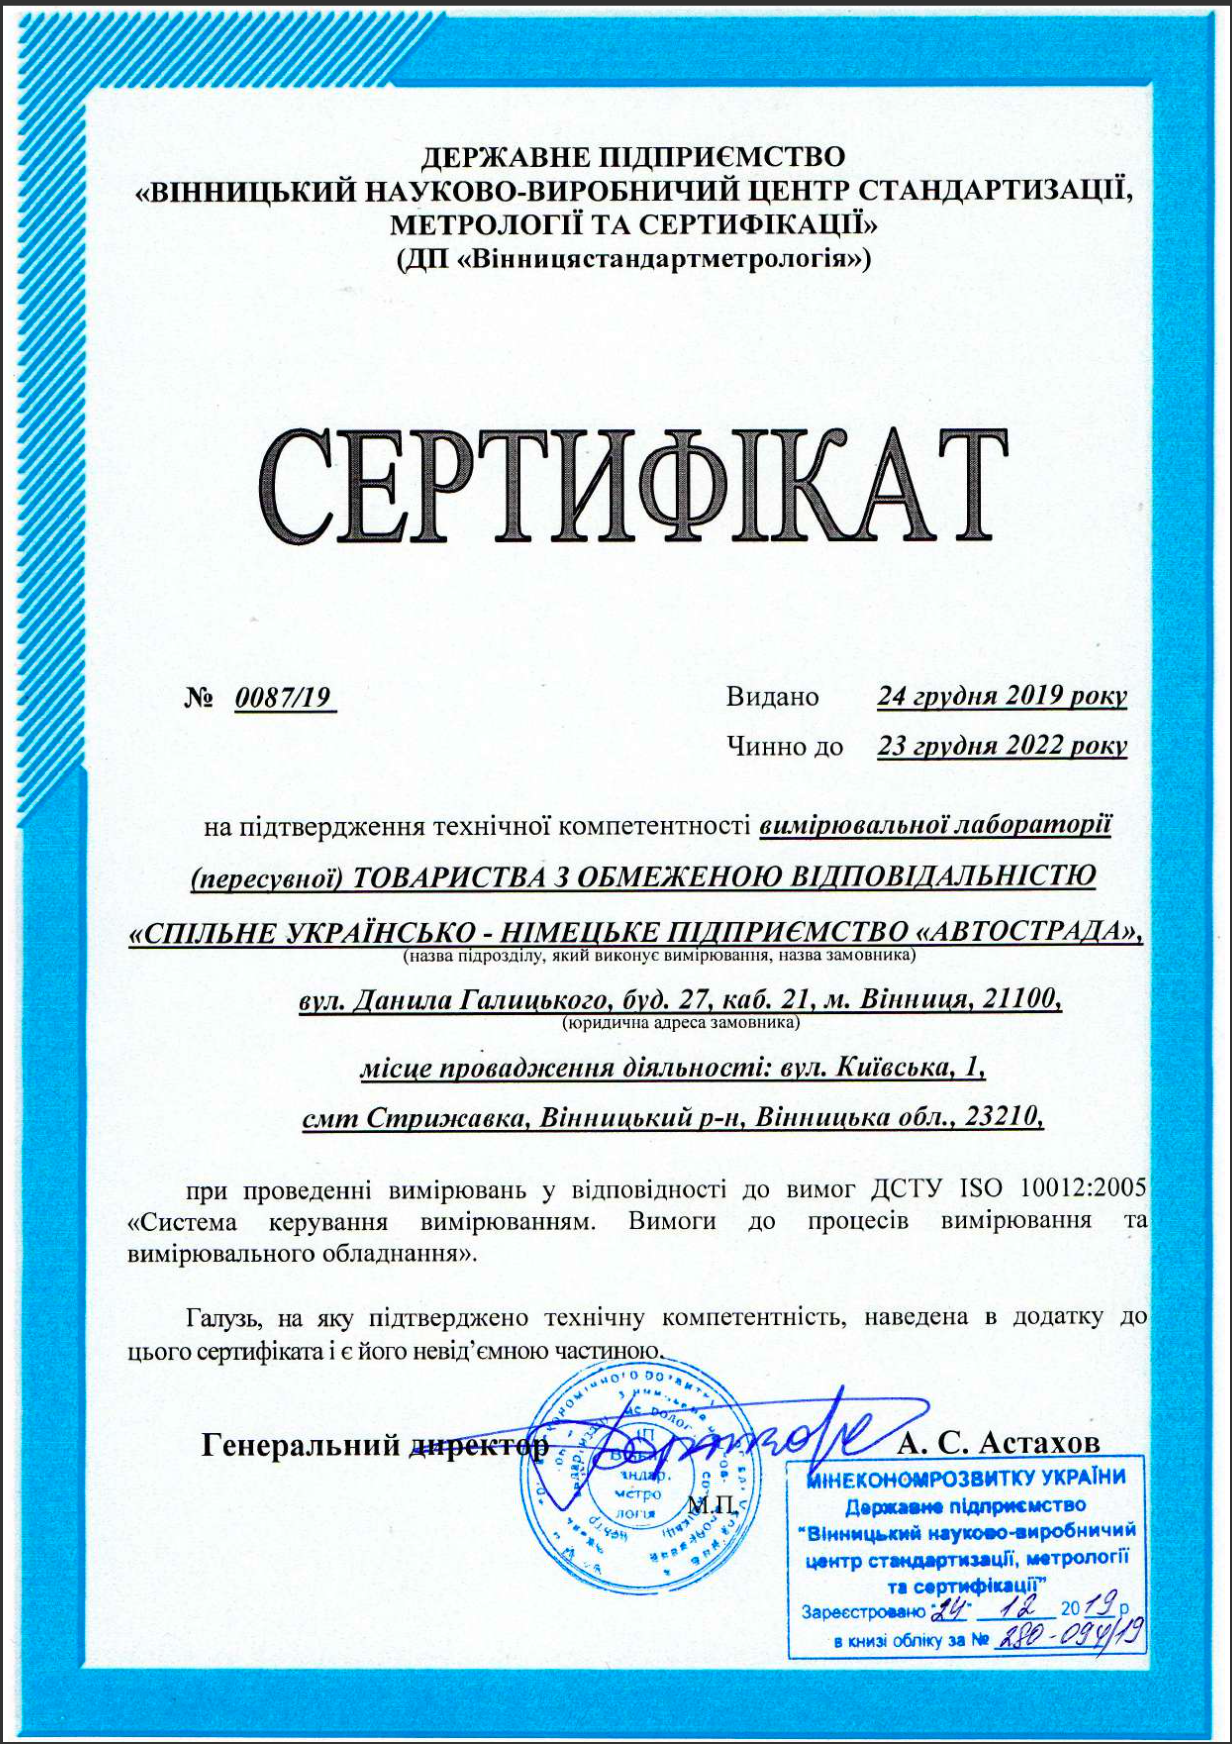 Certificate for conformity of the measuring laboratory